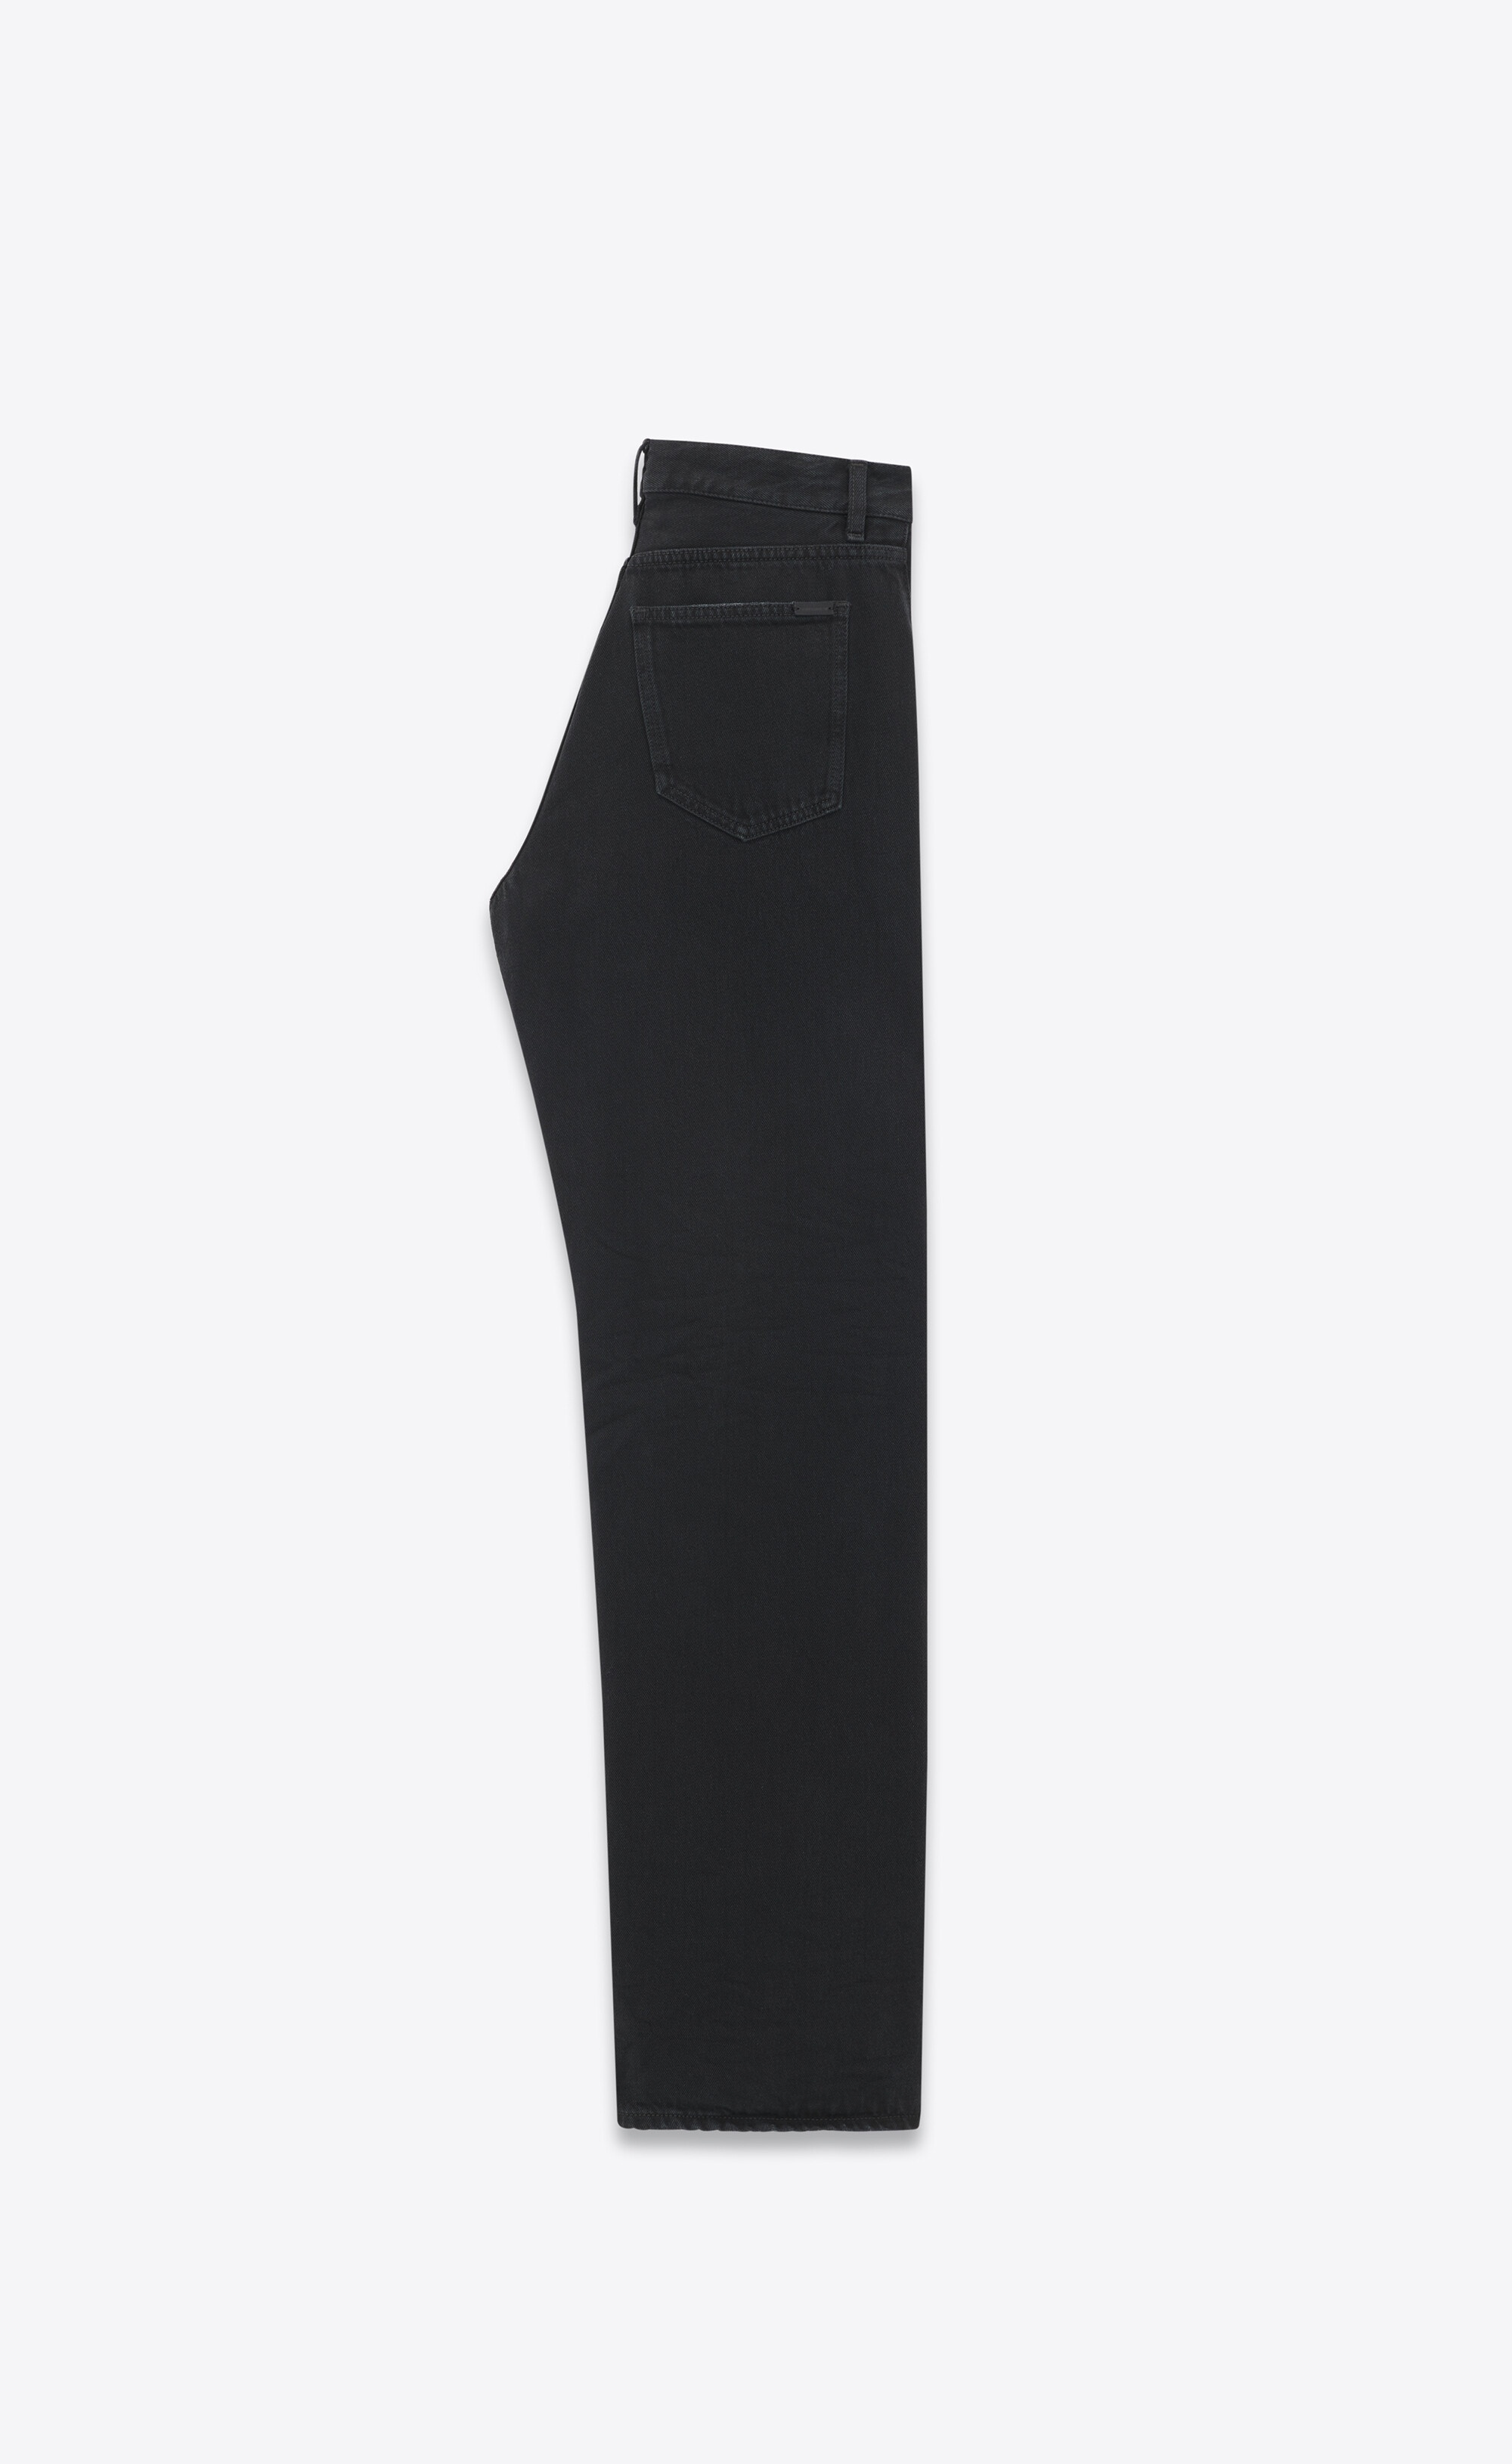 long extreme baggy jeans in carbon black denim - 3